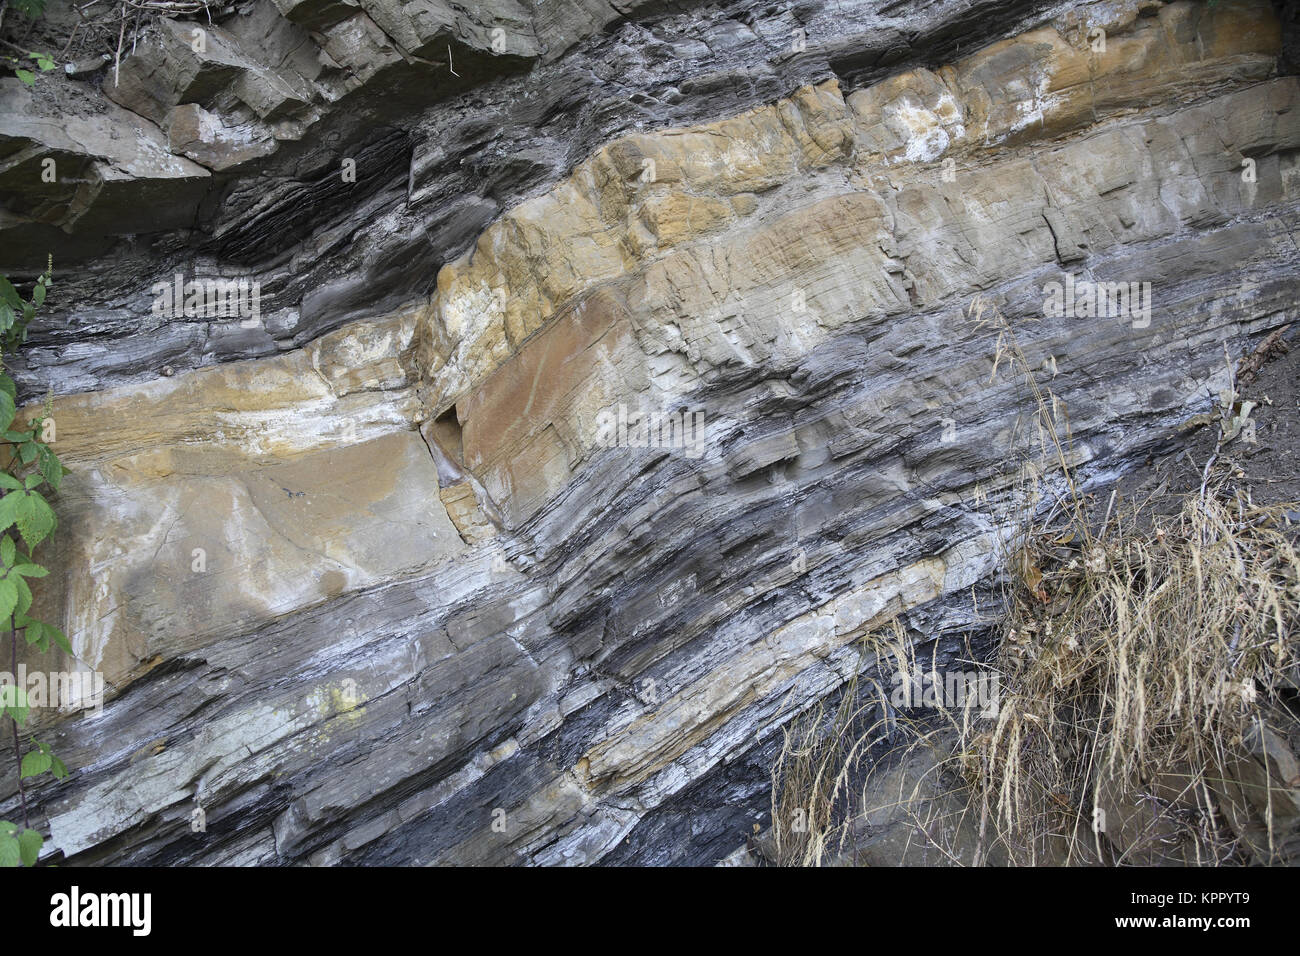 Germany, Ruhr area, Herdecke, geological outcrop at the Schiffswinkel, shale clay, sandstone and black coal, originated for 300 million years.  Deutsc Stock Photo